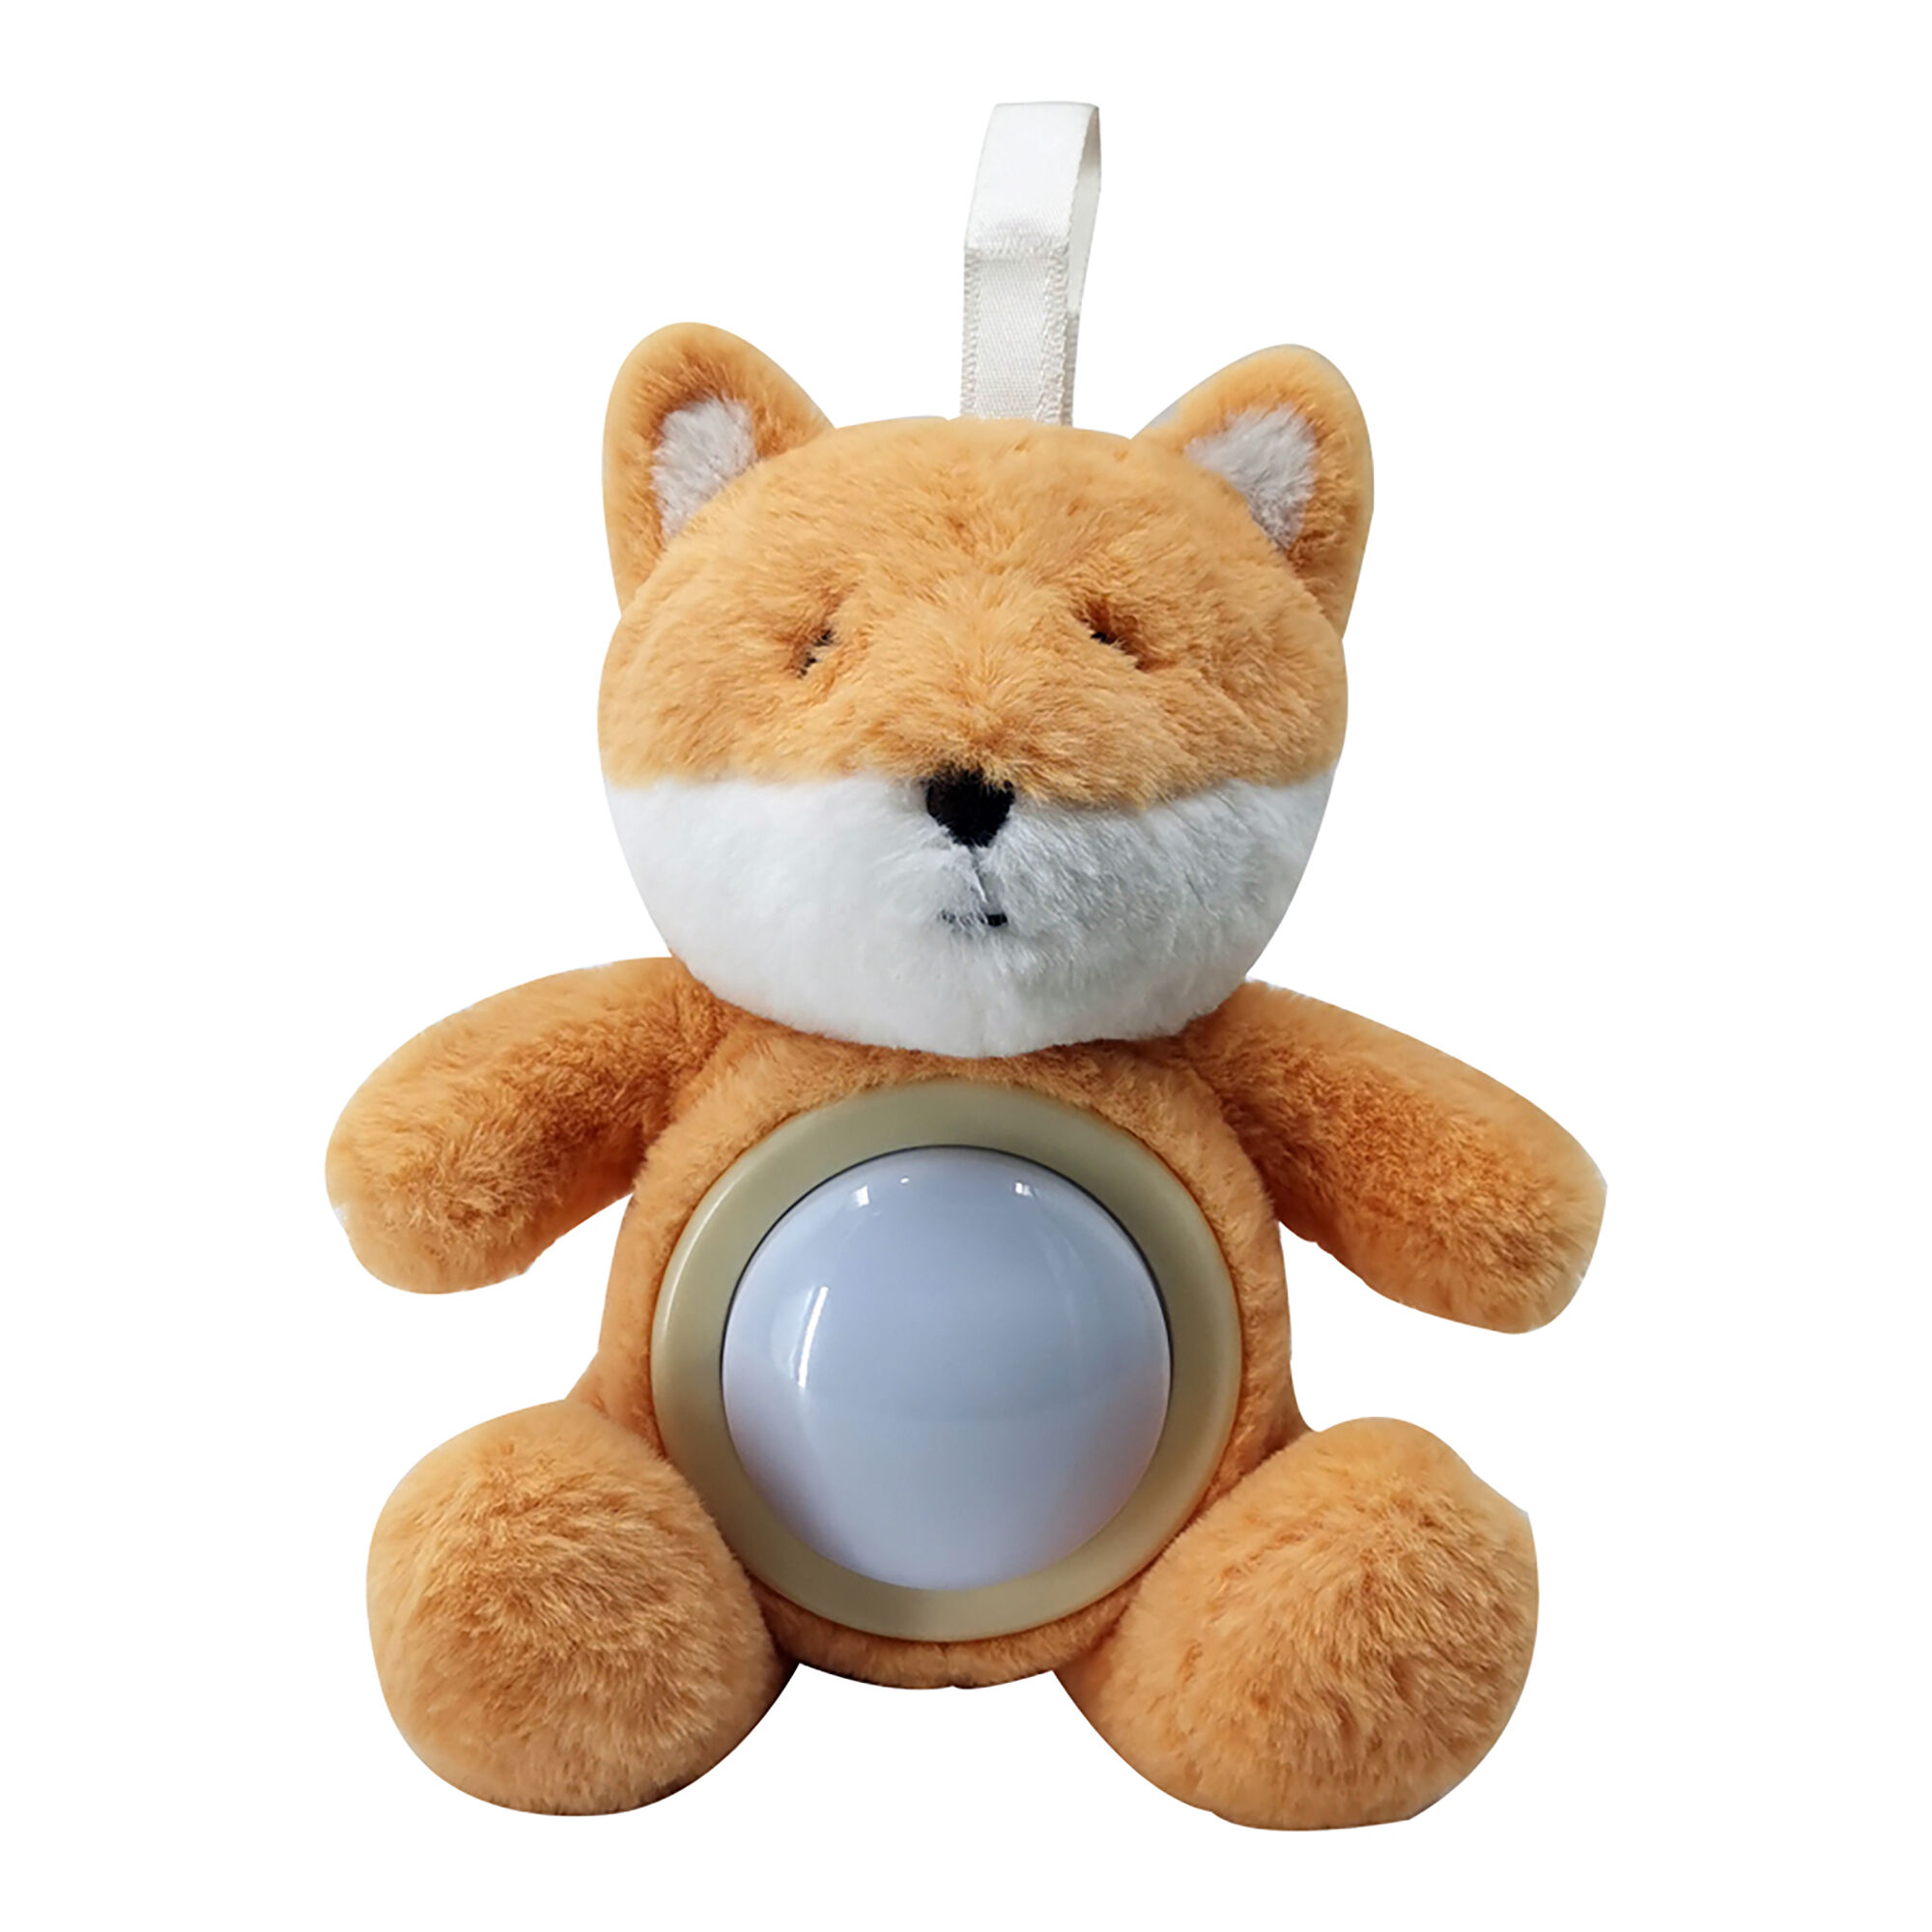 Premium OEM LED-Embedded Plush Teddy Bear Nightlights – Customizable Musical Sleep Companion, Battery-Powered Projection Lamp for Infants, Soothing Melodies, Cuddly Bedtime Buddy, and Gentle Nursery Lighting Solution.